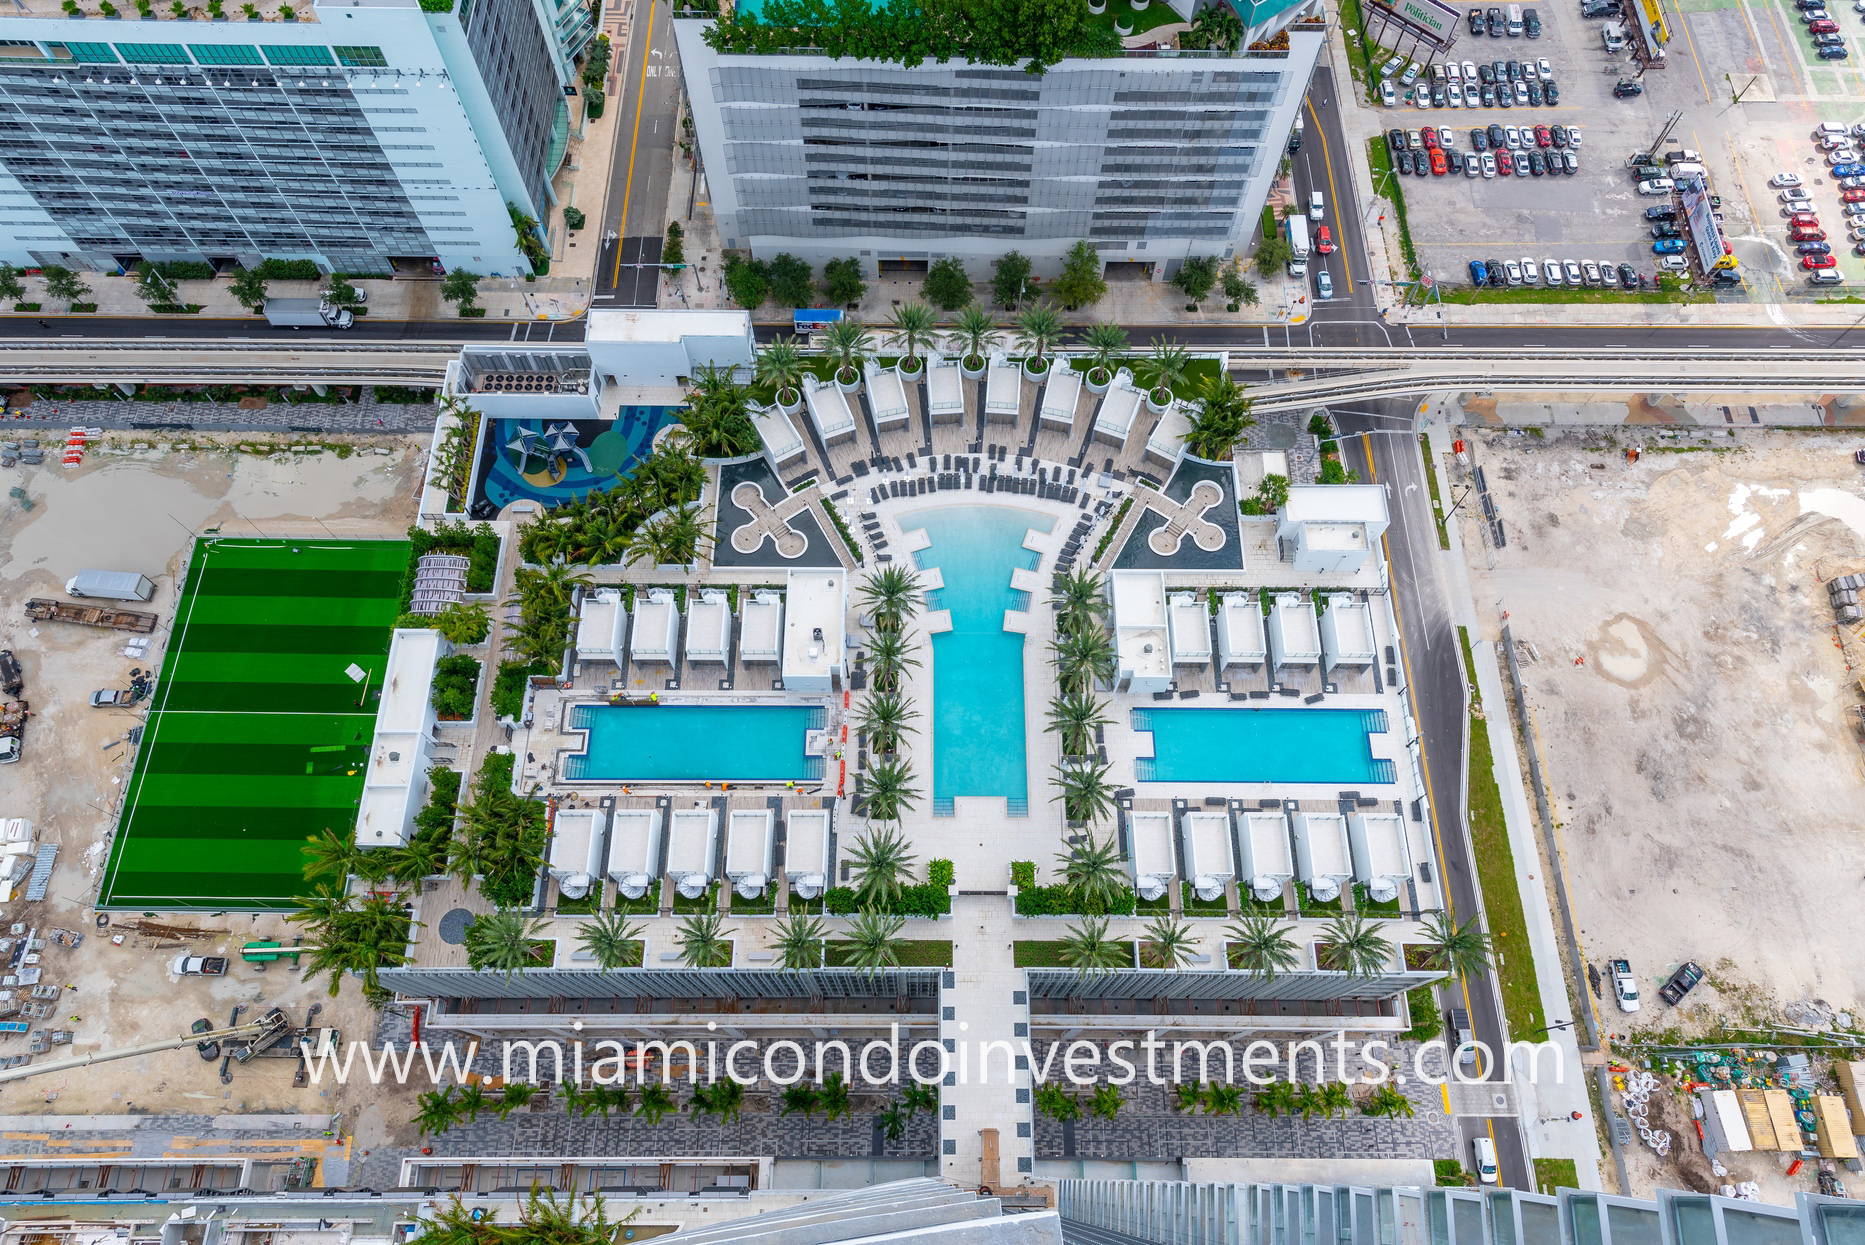 Paramount Miami resort-style pool deck from above